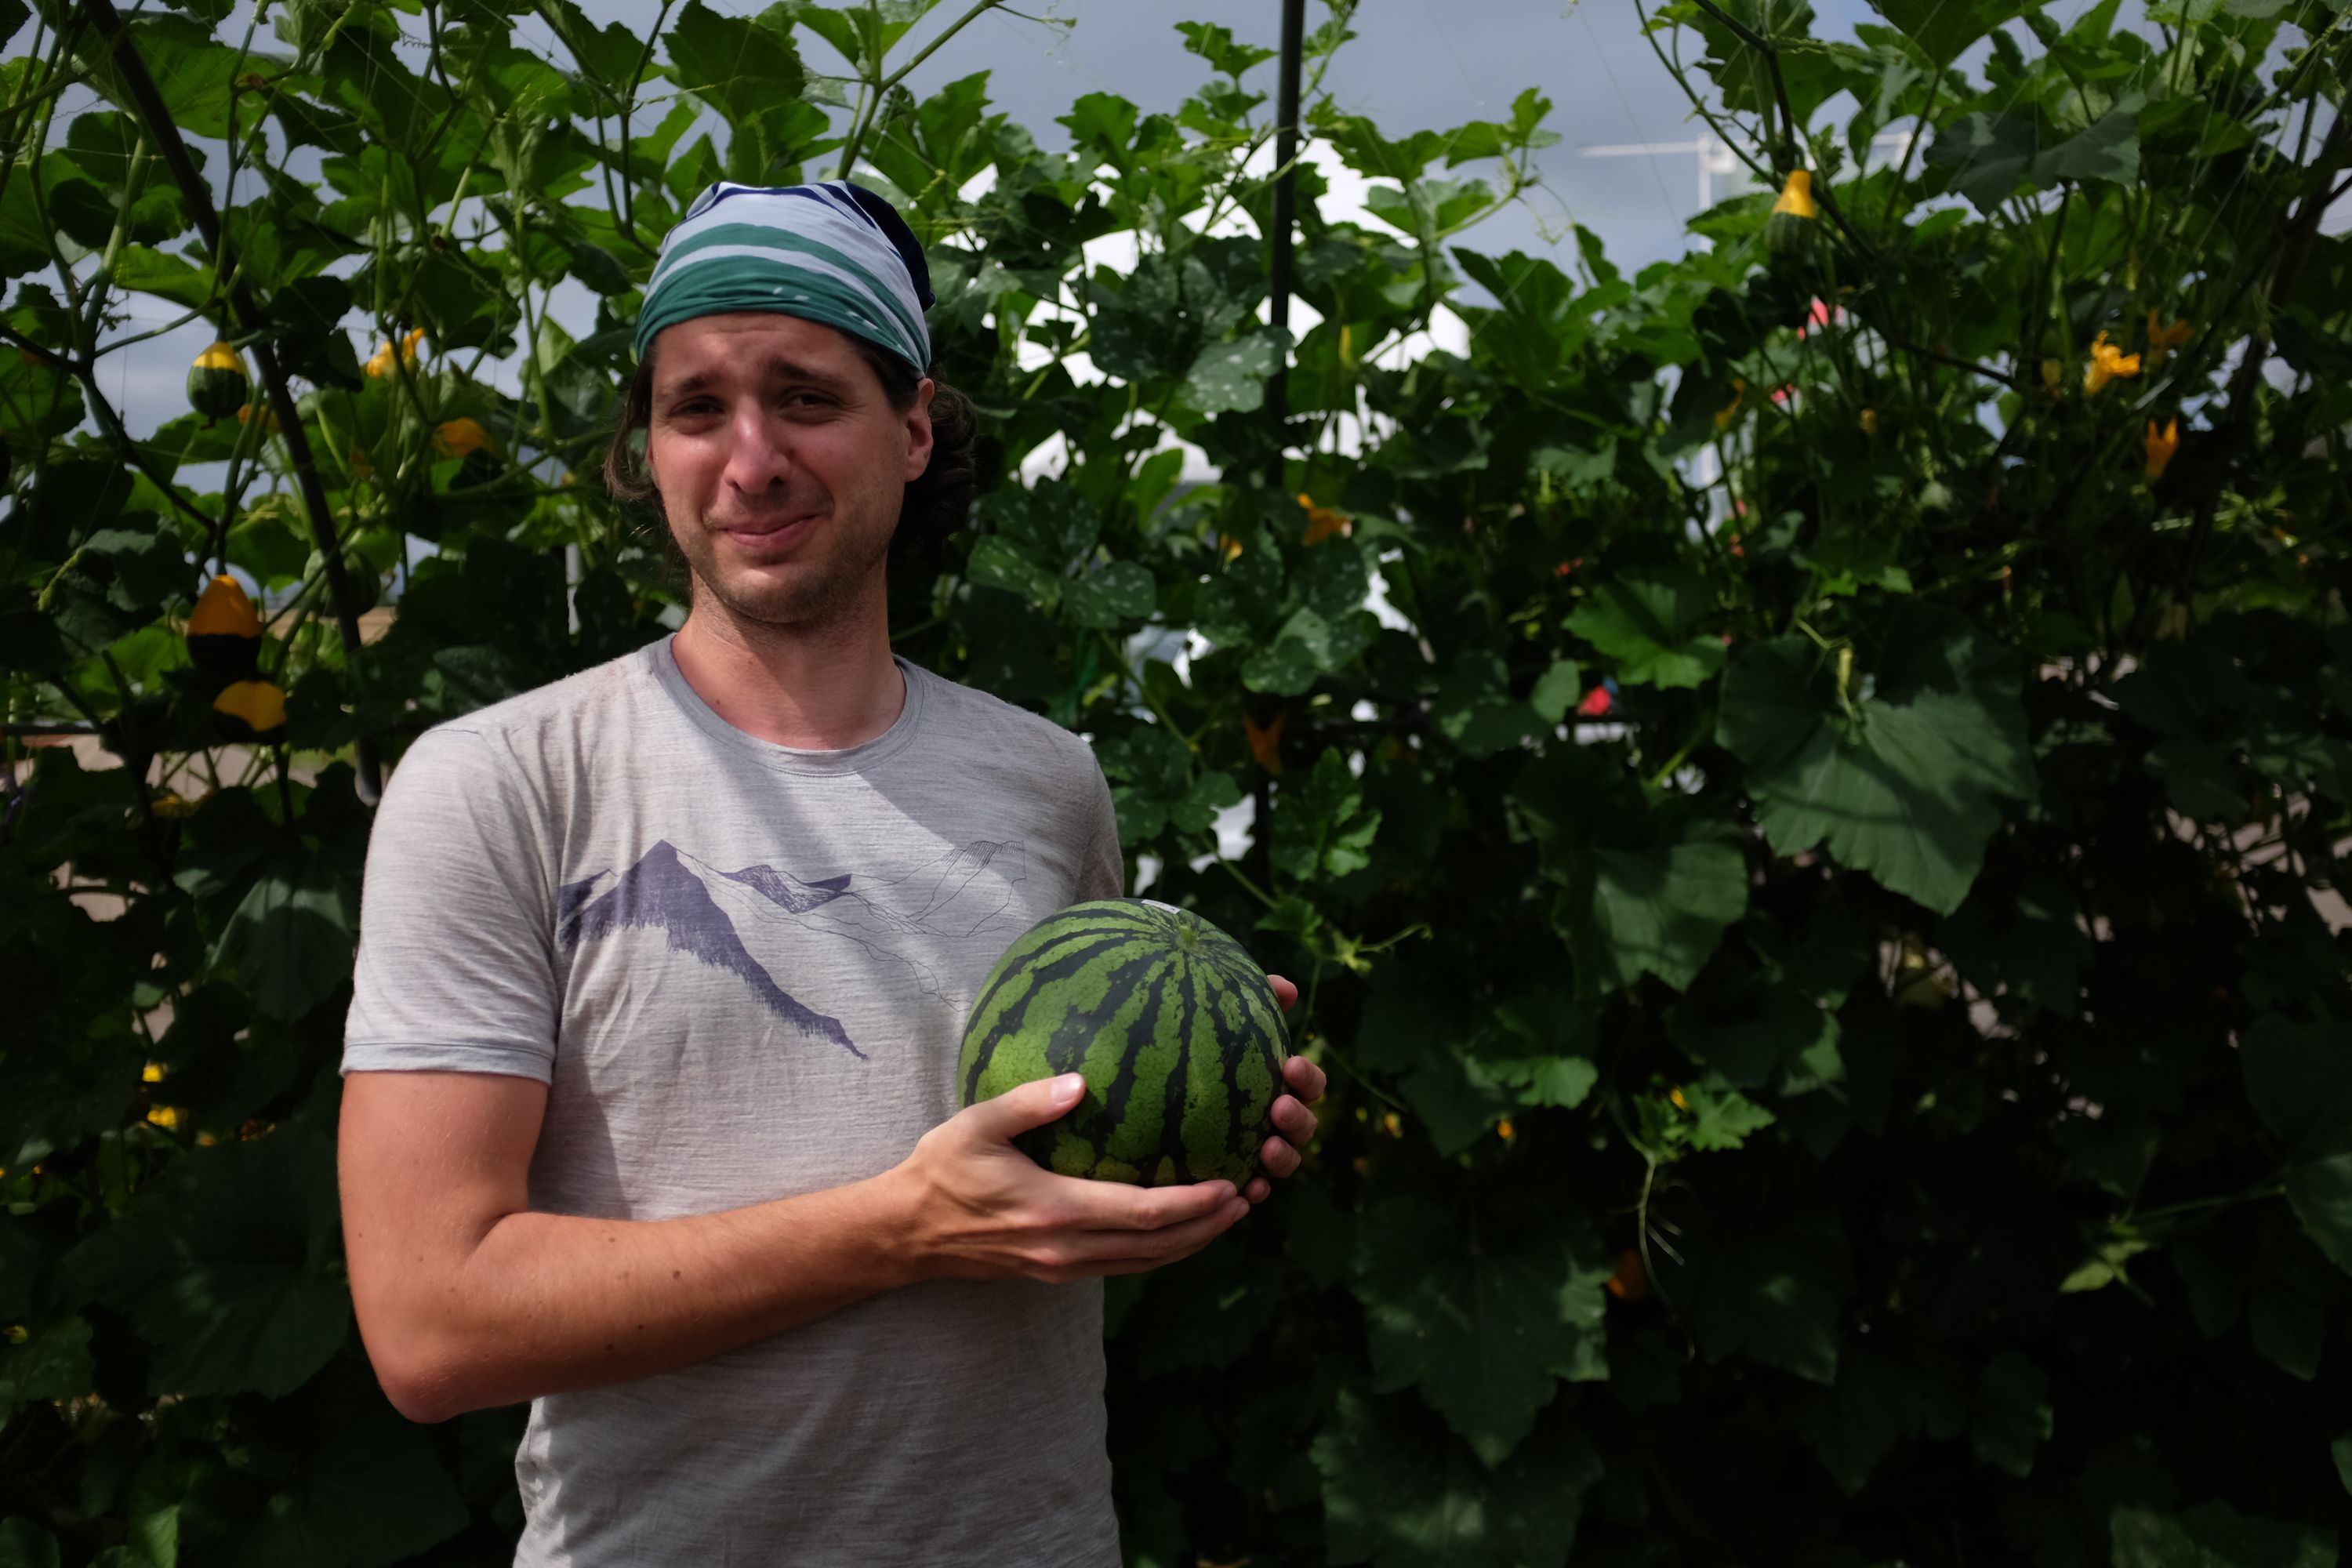 Gabor holds a small watermelon with a frown.